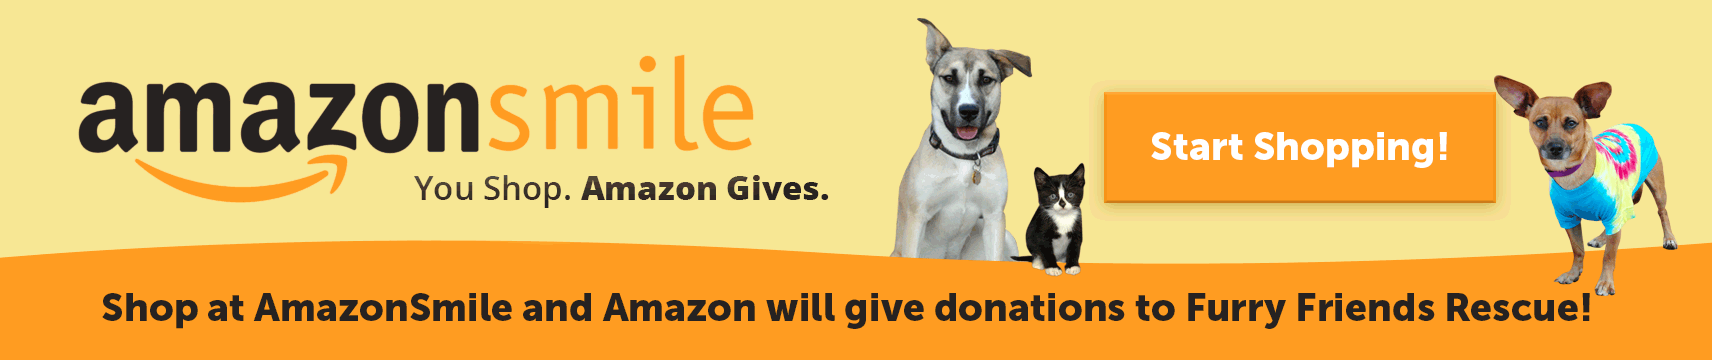 AmazonSmile - Shop at AmazonSmile and Amazon will give donations to Furry Friends Rescue!